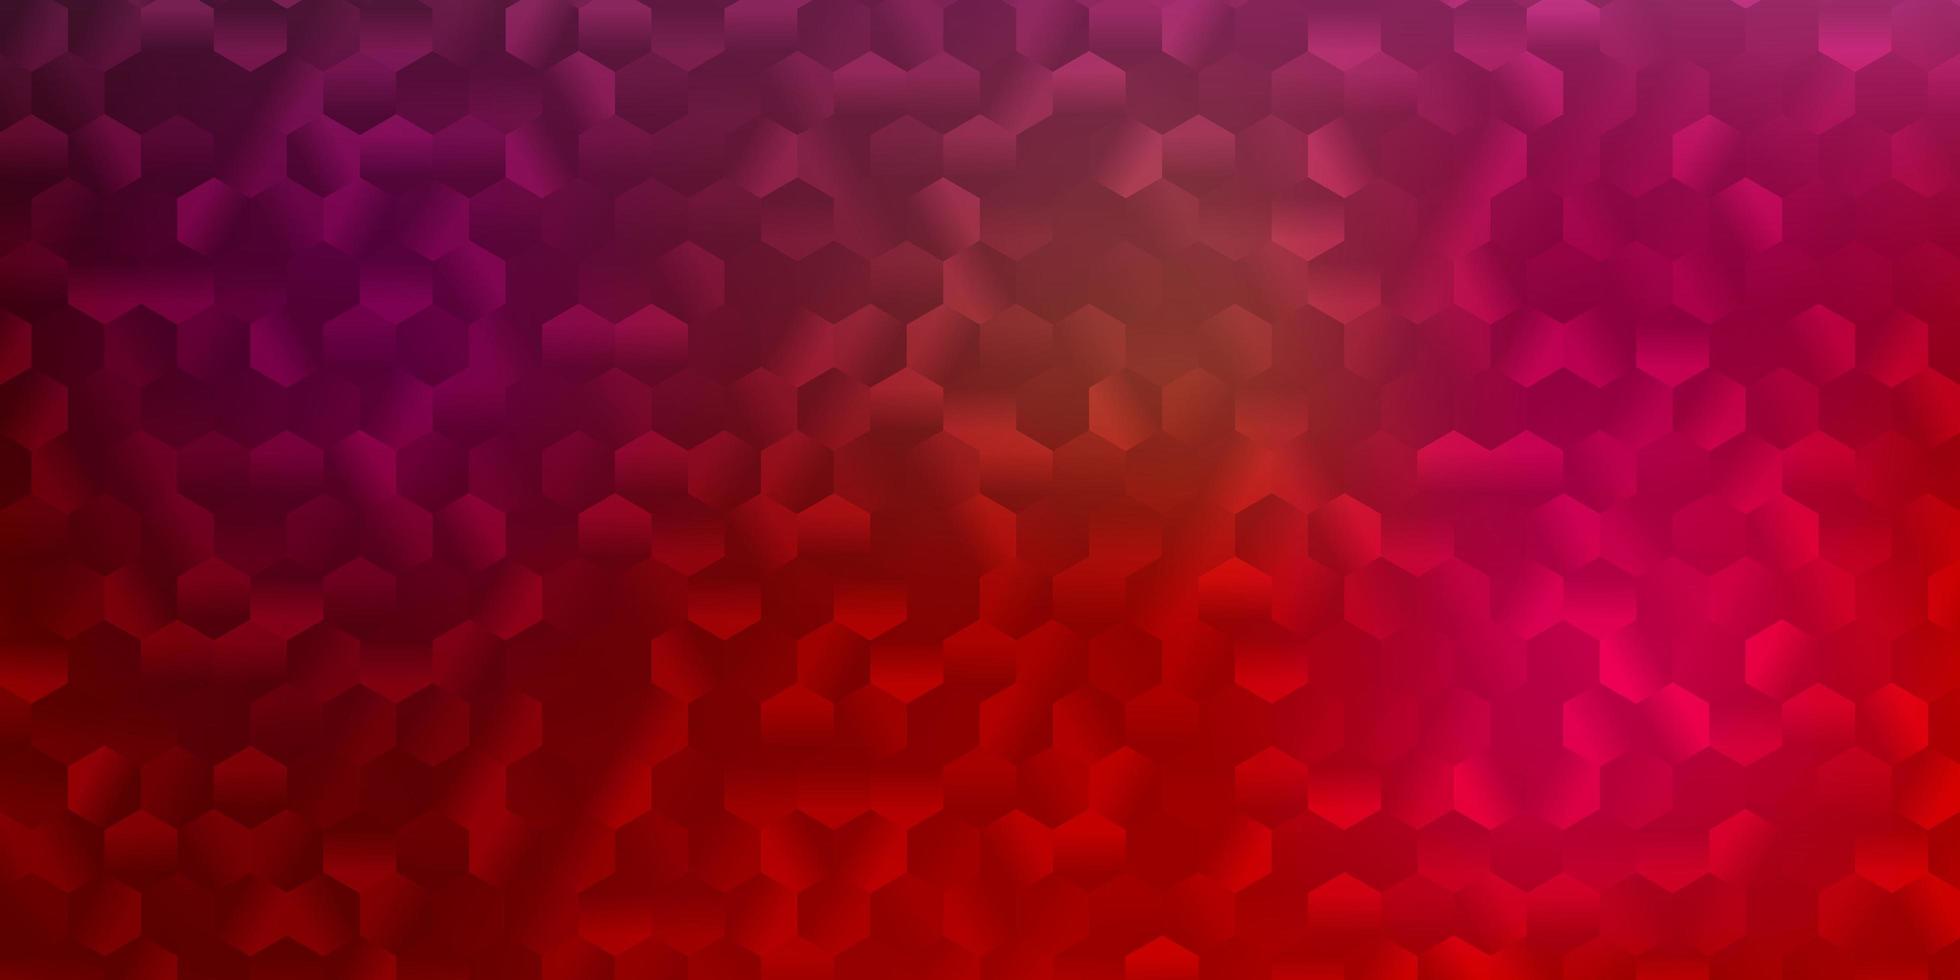 Light red vector cover with simple hexagons.